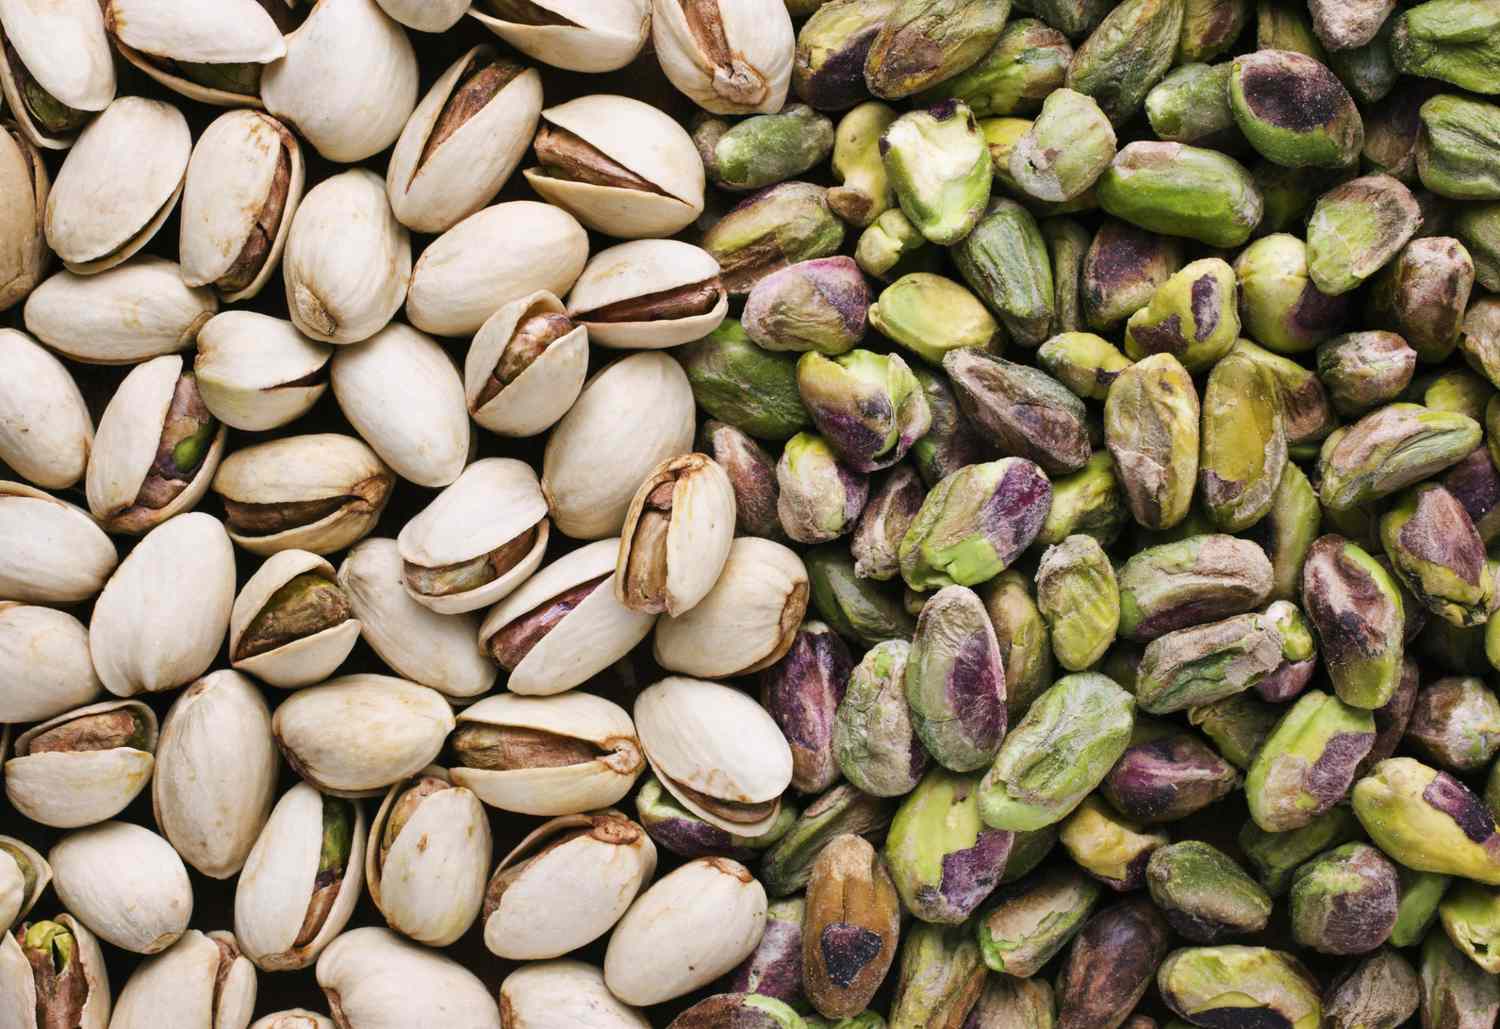 Raw unsalted shelled pistachios | Buy at a cheap price